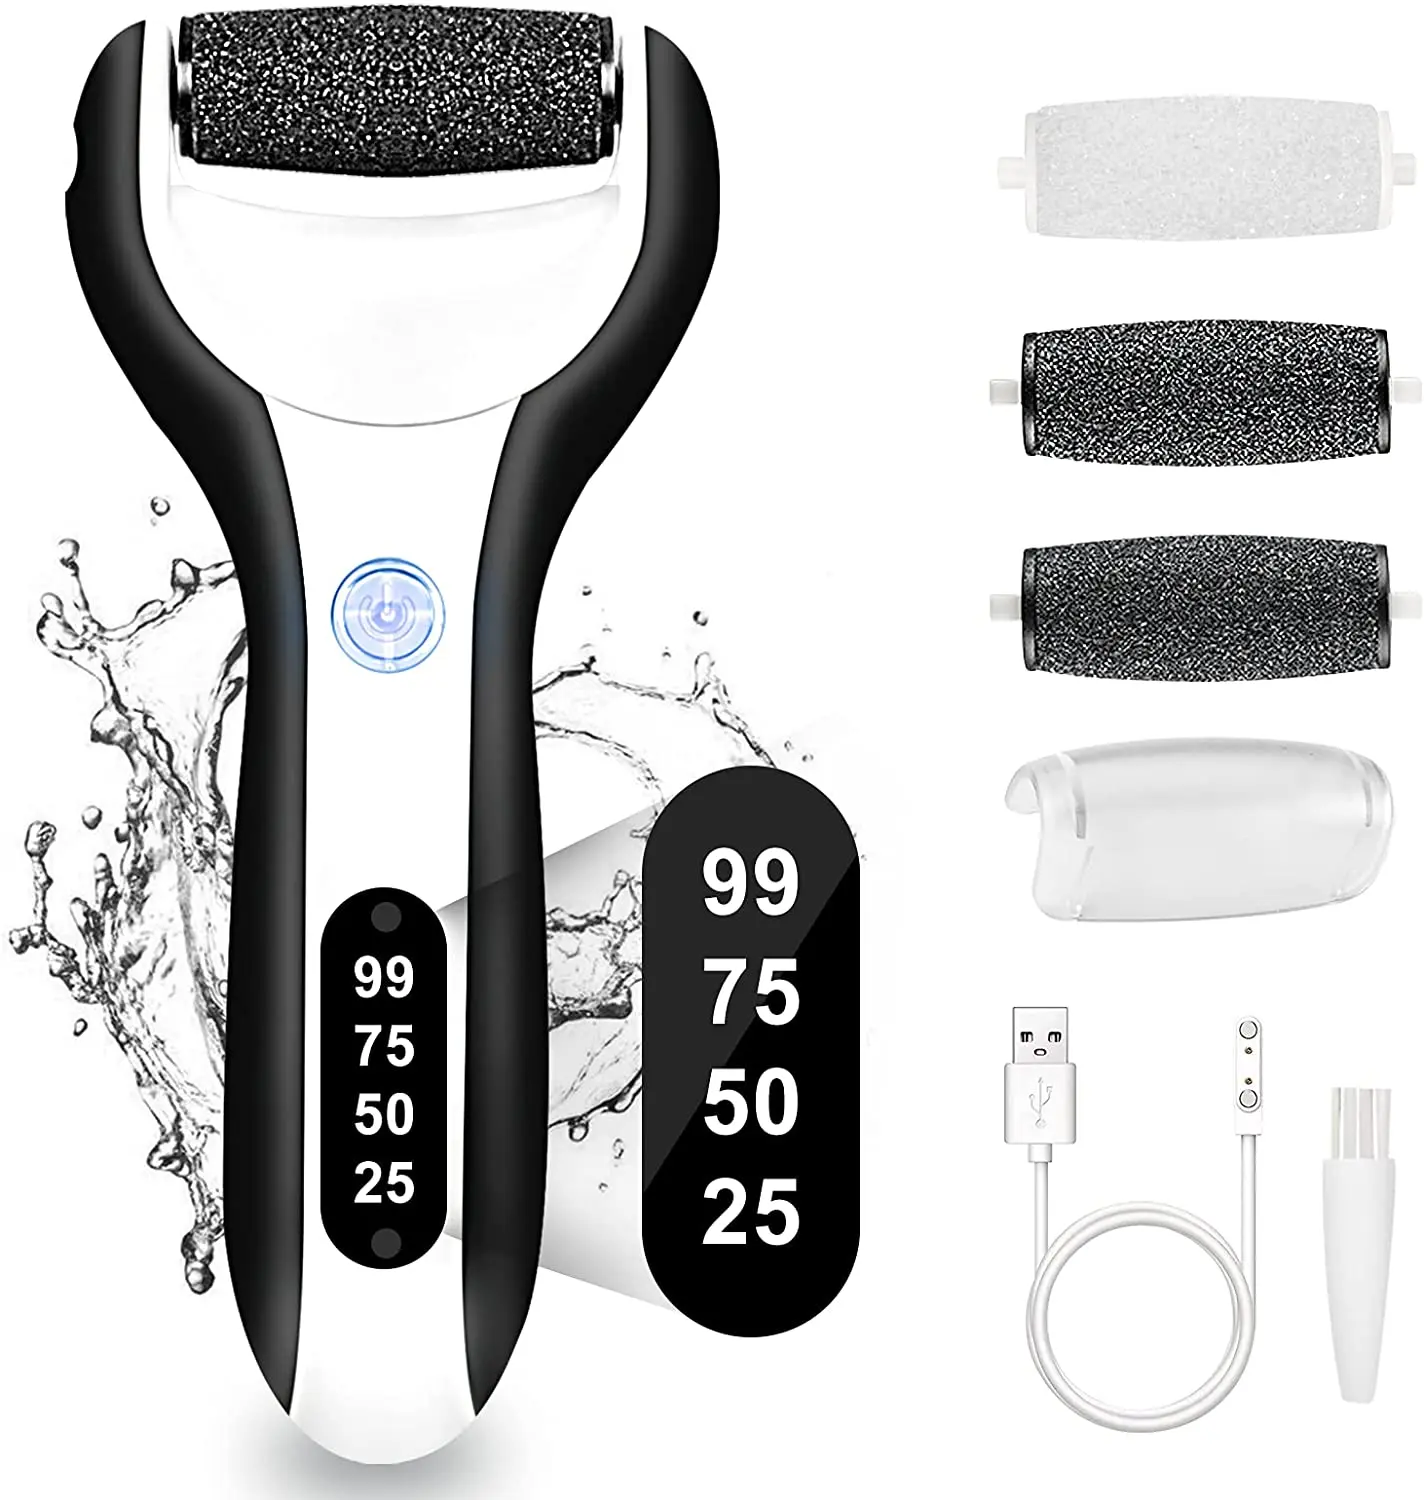 Rechargeable Electric Foot File Callus Remover Machine Pedicure Device Foot Care Tools Feet For Heels Remove Dead Skin black multifunction electric remove calluses hardness dead skin heels grinding pedicure foot grinder pedicure with replacement roller